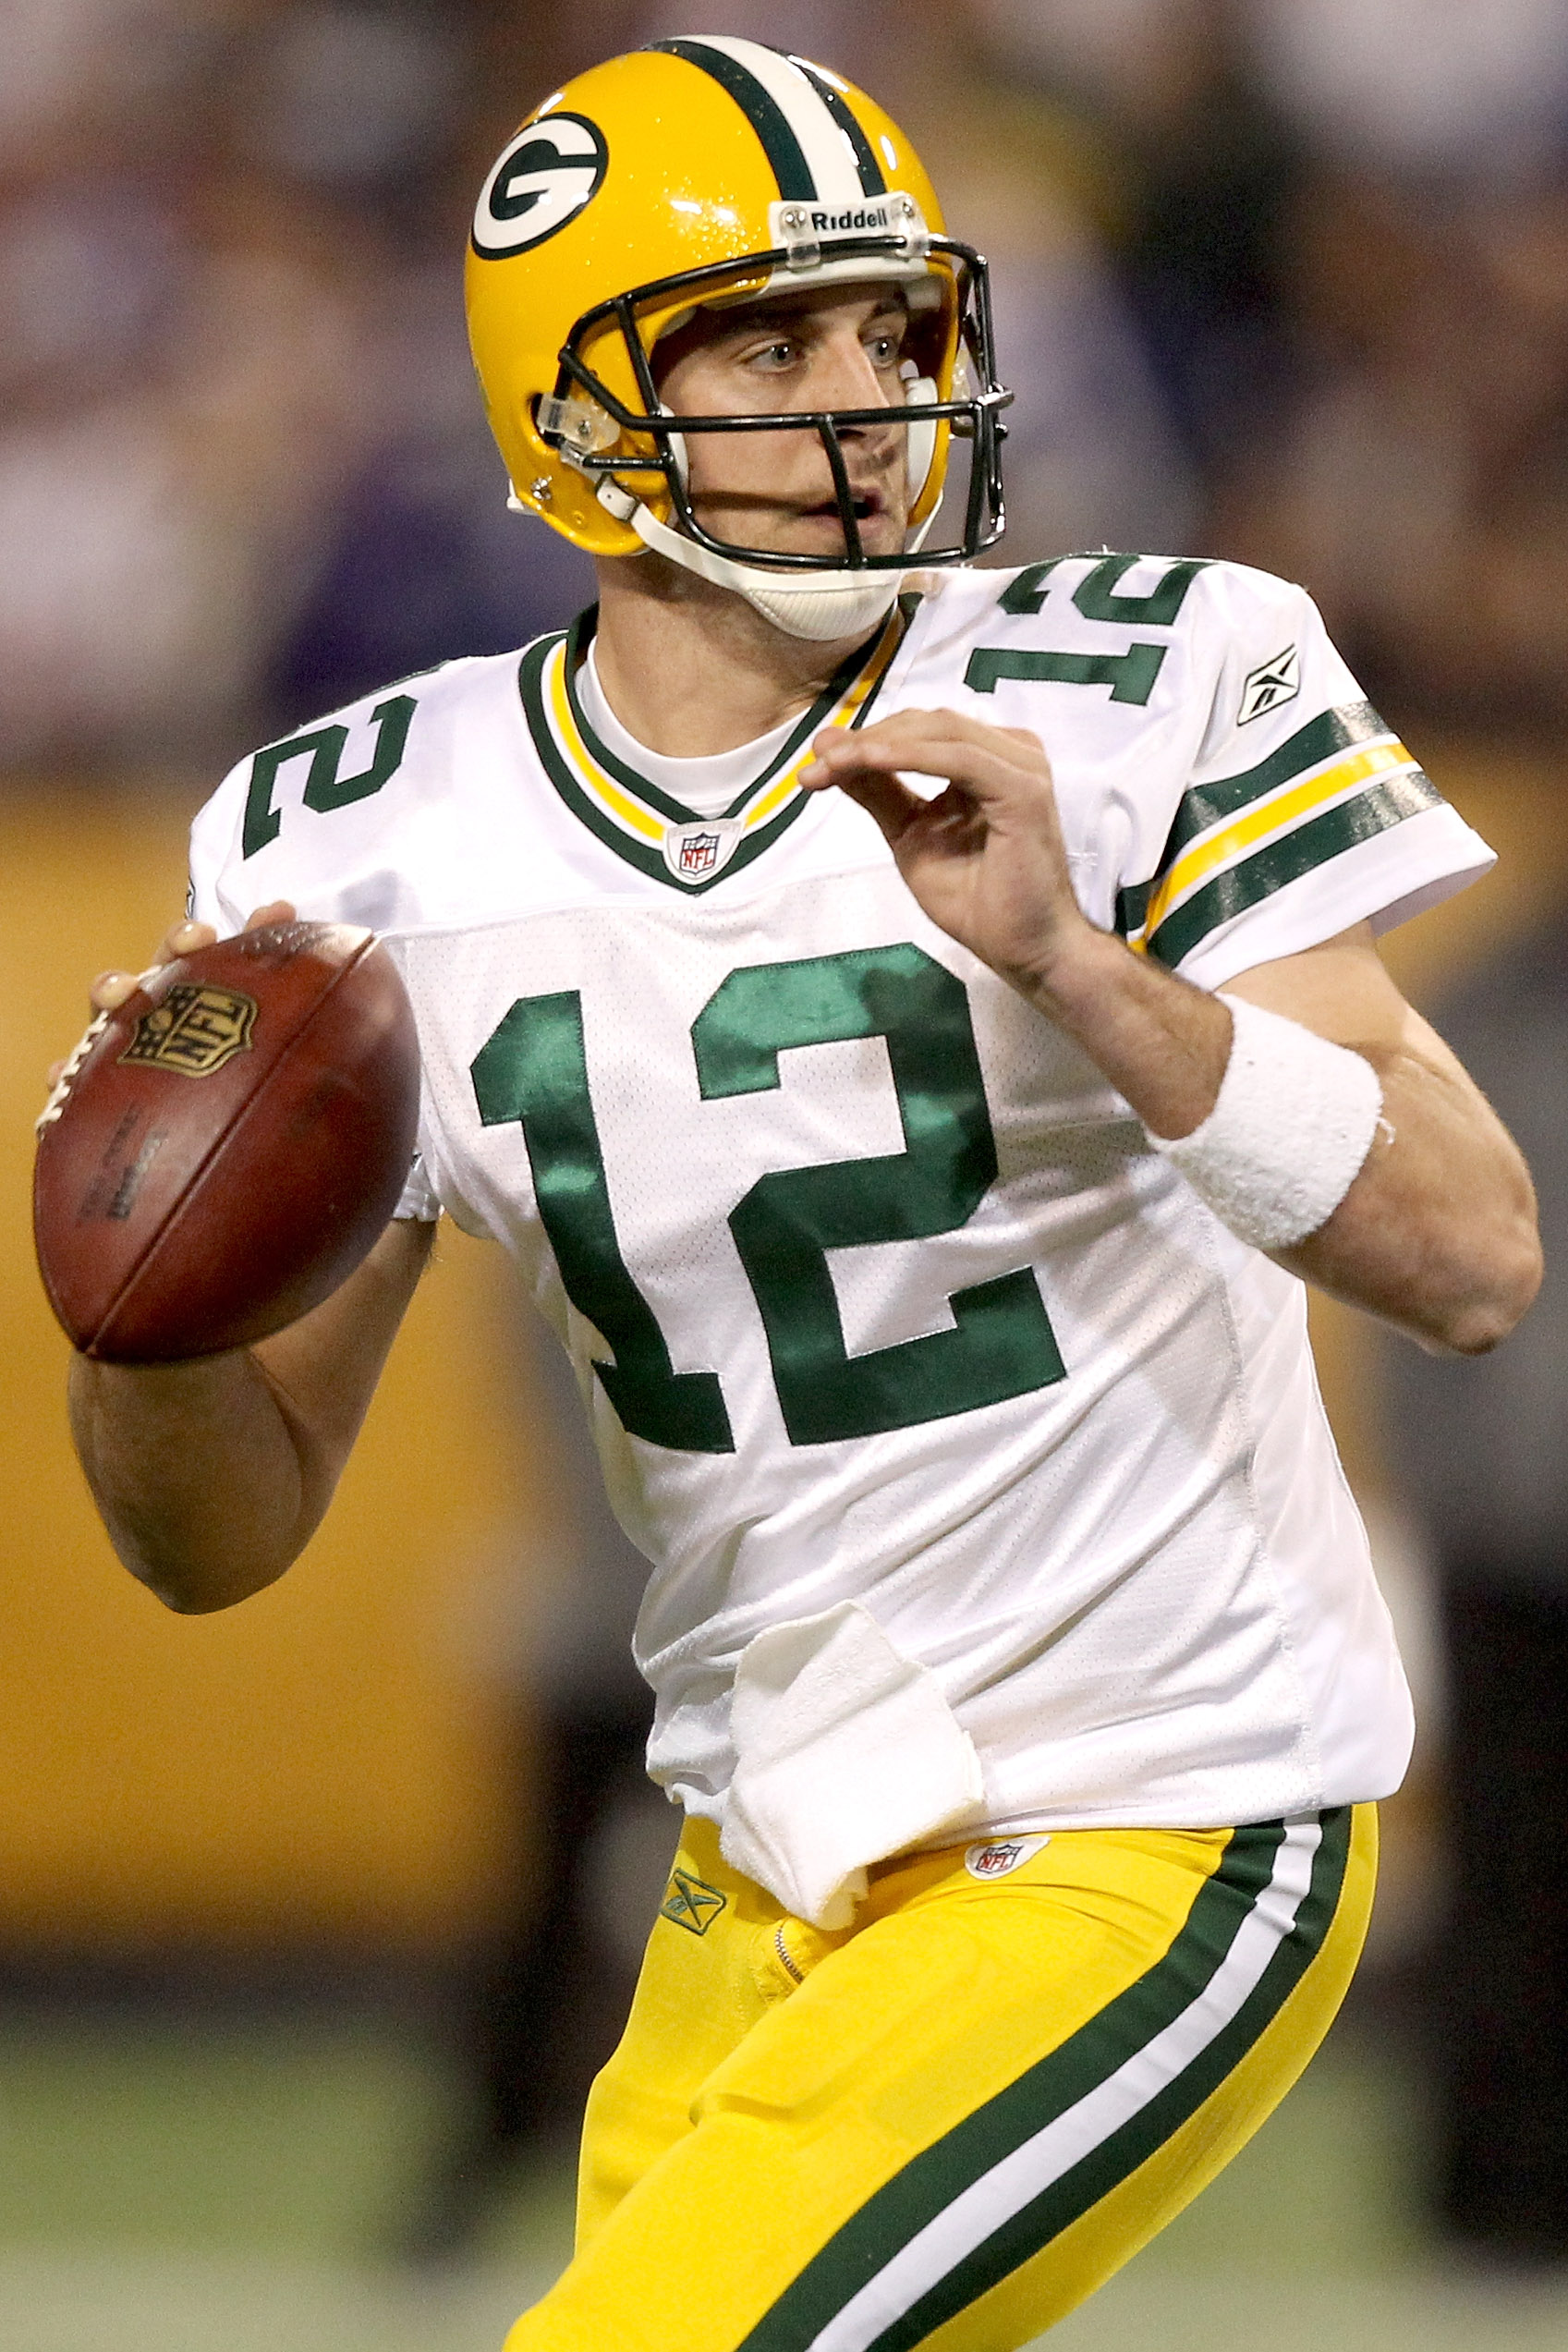 MINNEAPOLIS - NOVEMBER 21:  Quarterback Aaron Rodgers #12 of the Green Bay Packers throws against the Minnesota Vikings at the Hubert H. Humphrey Metrodome on November 21, 2010 in Minneapolis, Minnesota.  (Photo by Matthew Stockman/Getty Images)